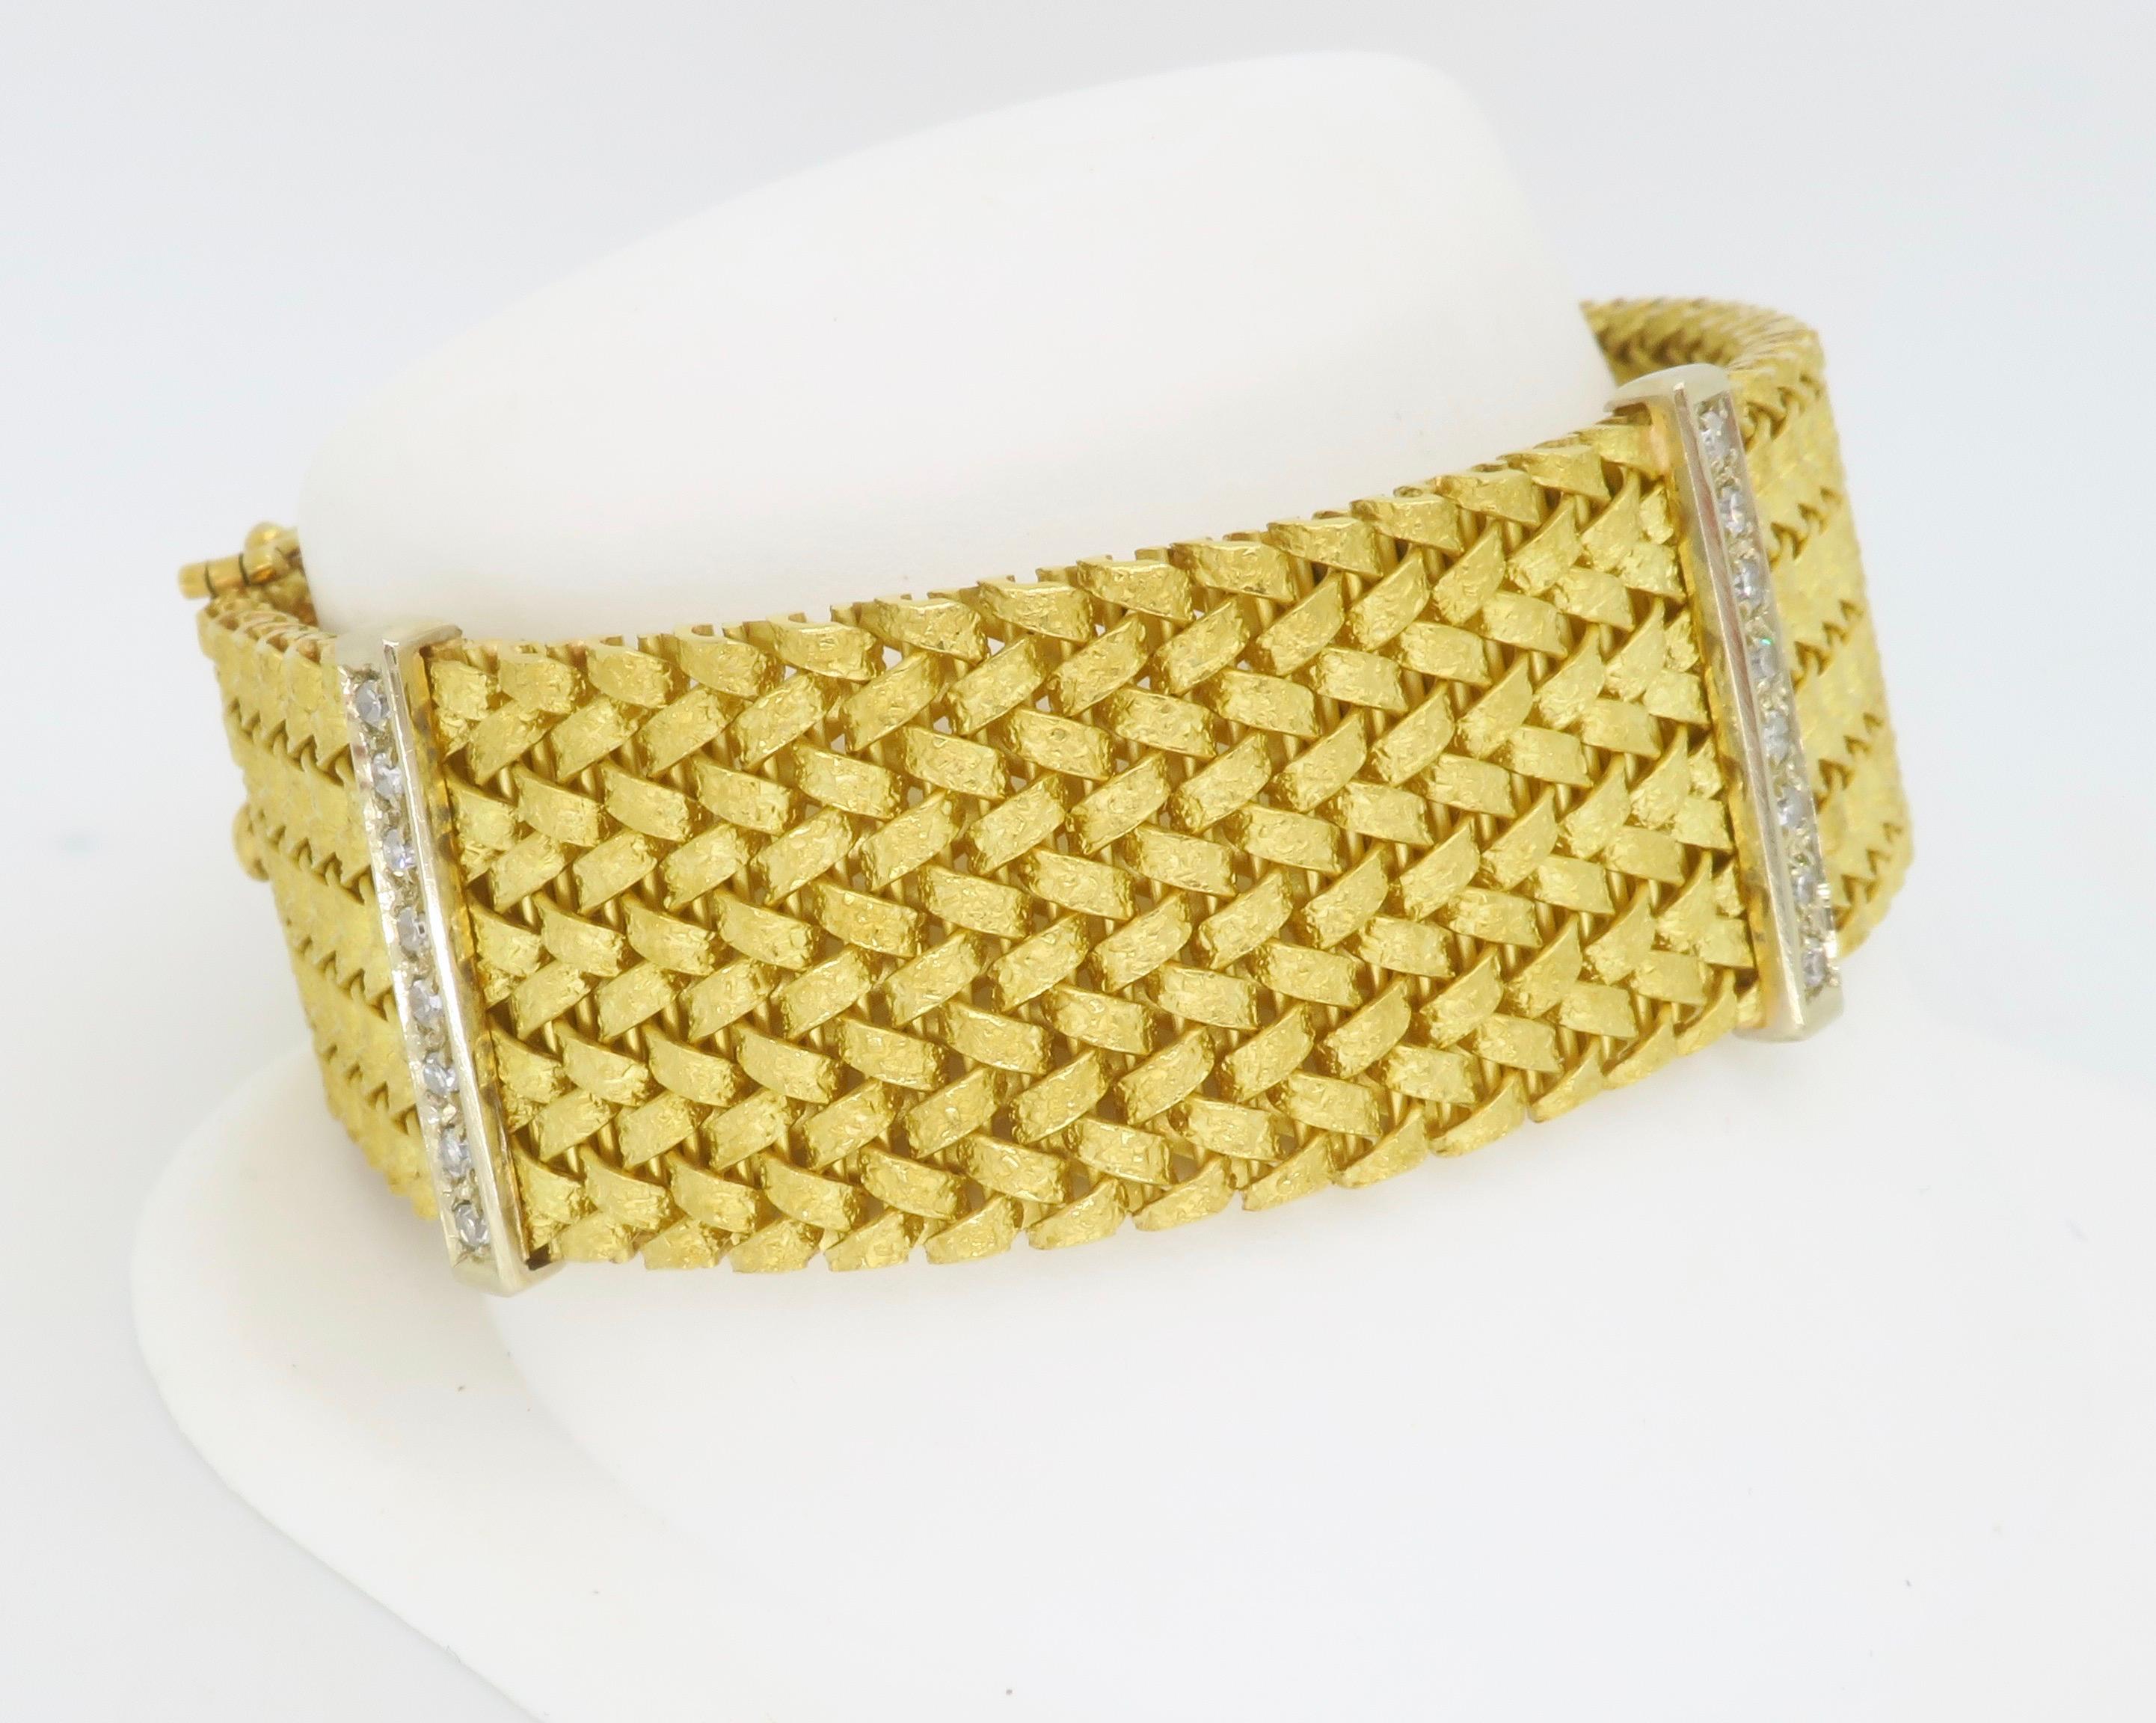 Round Cut Intricate Mesh Bracelet Made in 18k Yellow Gold with Diamonds